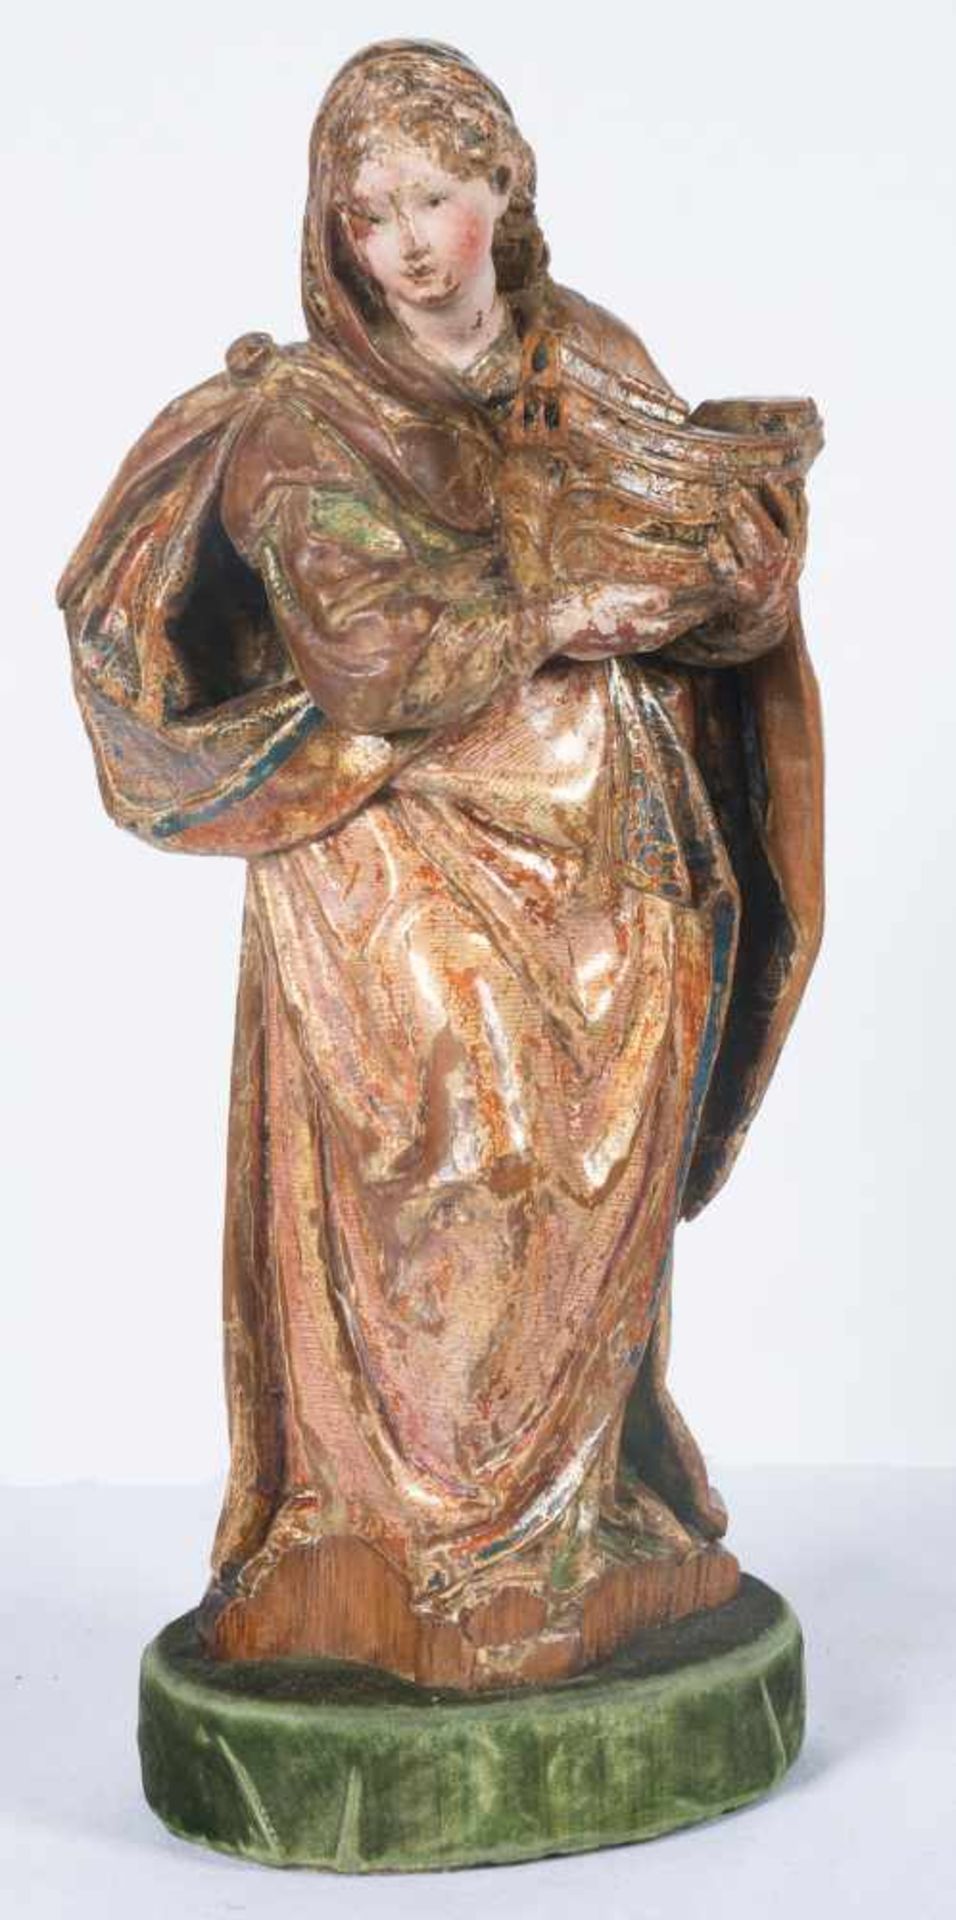 Saint Ursula. Carved, gilded and polychromed wooden sculpture. 16th century. In its carved and - Bild 4 aus 5